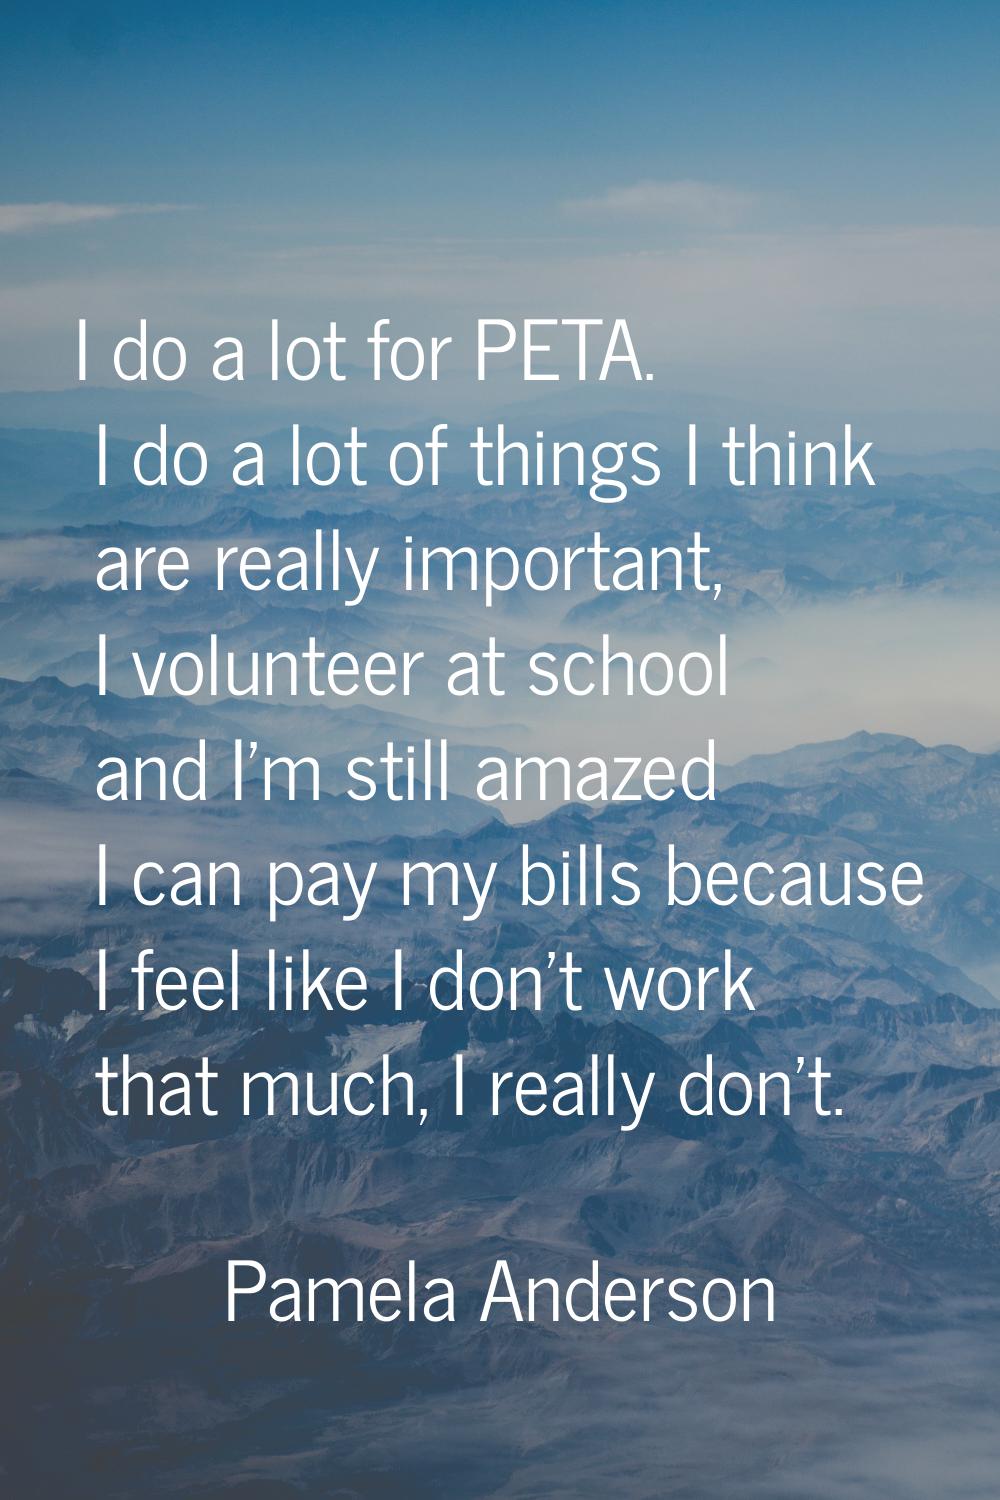 I do a lot for PETA. I do a lot of things I think are really important, I volunteer at school and I